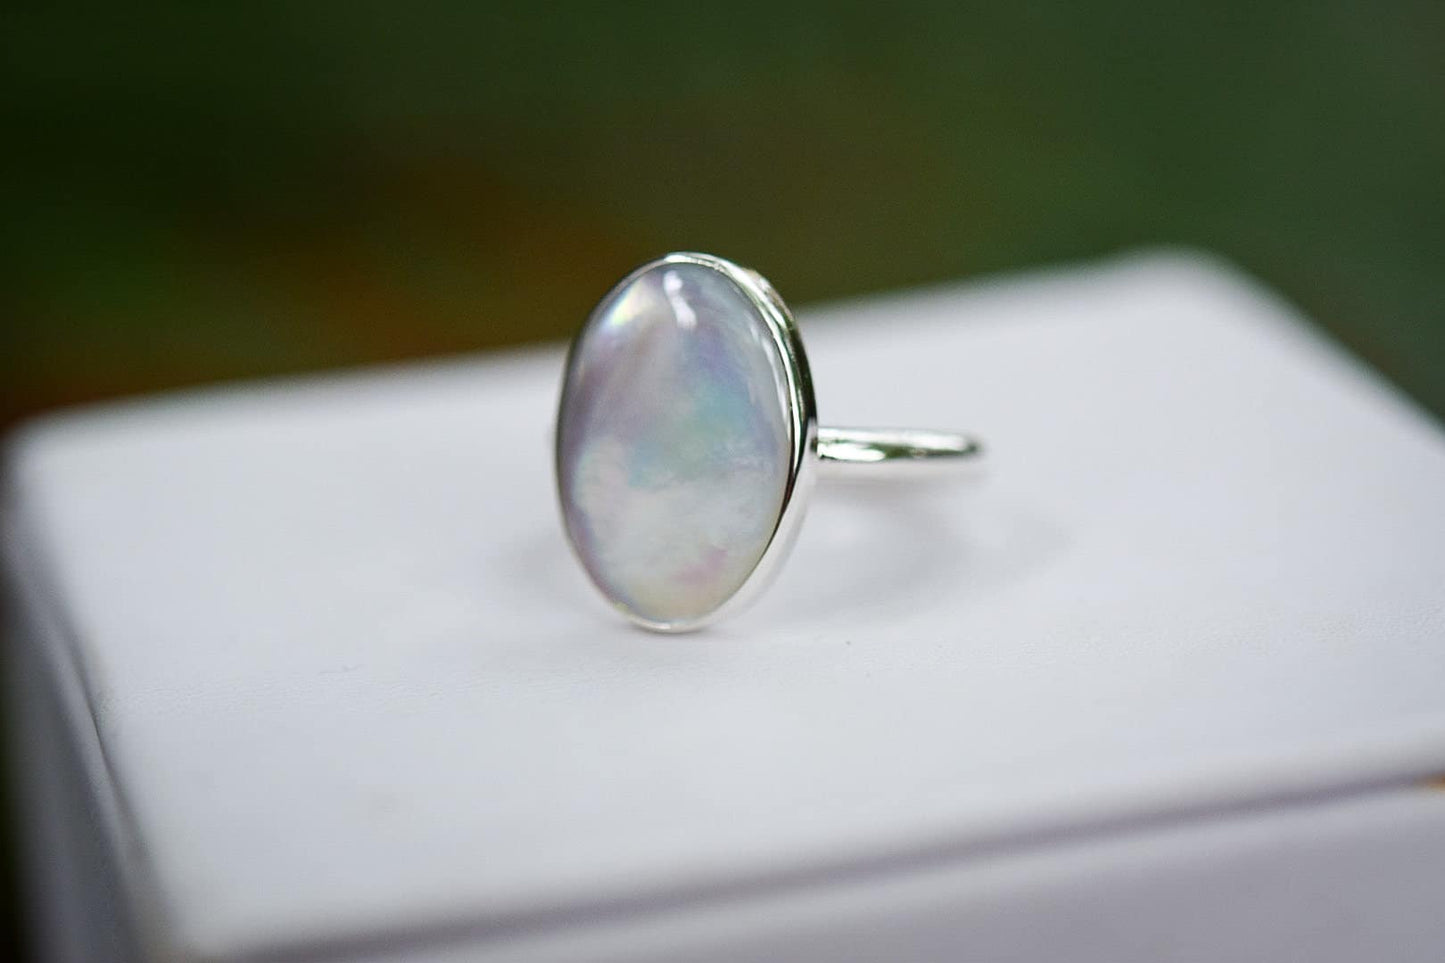 Mother of Pearl Ring/ Sterling Silver/ White Mother of Pearl